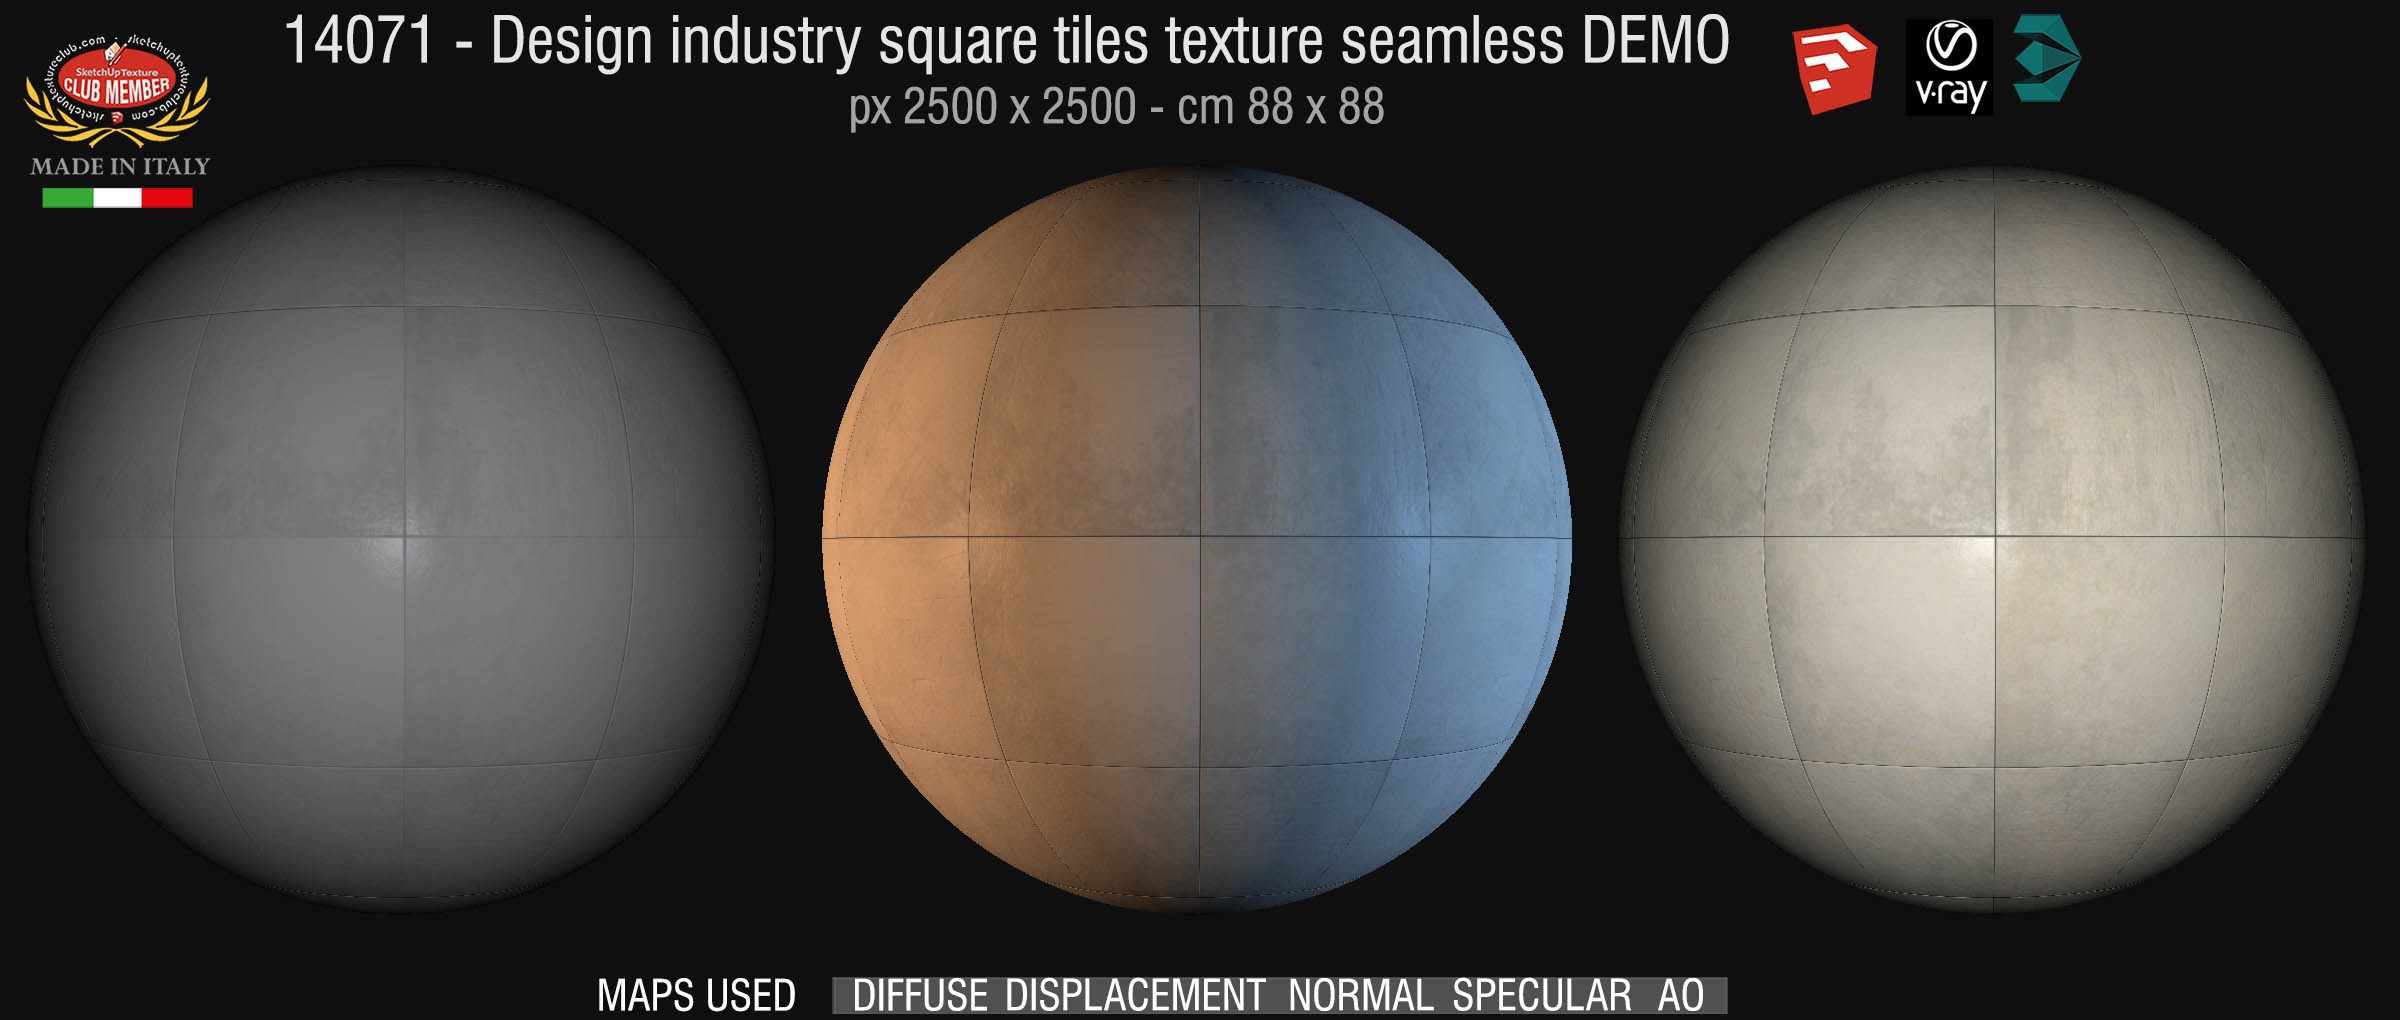 14071 Design industry square tile texture seamless + maps DEMO